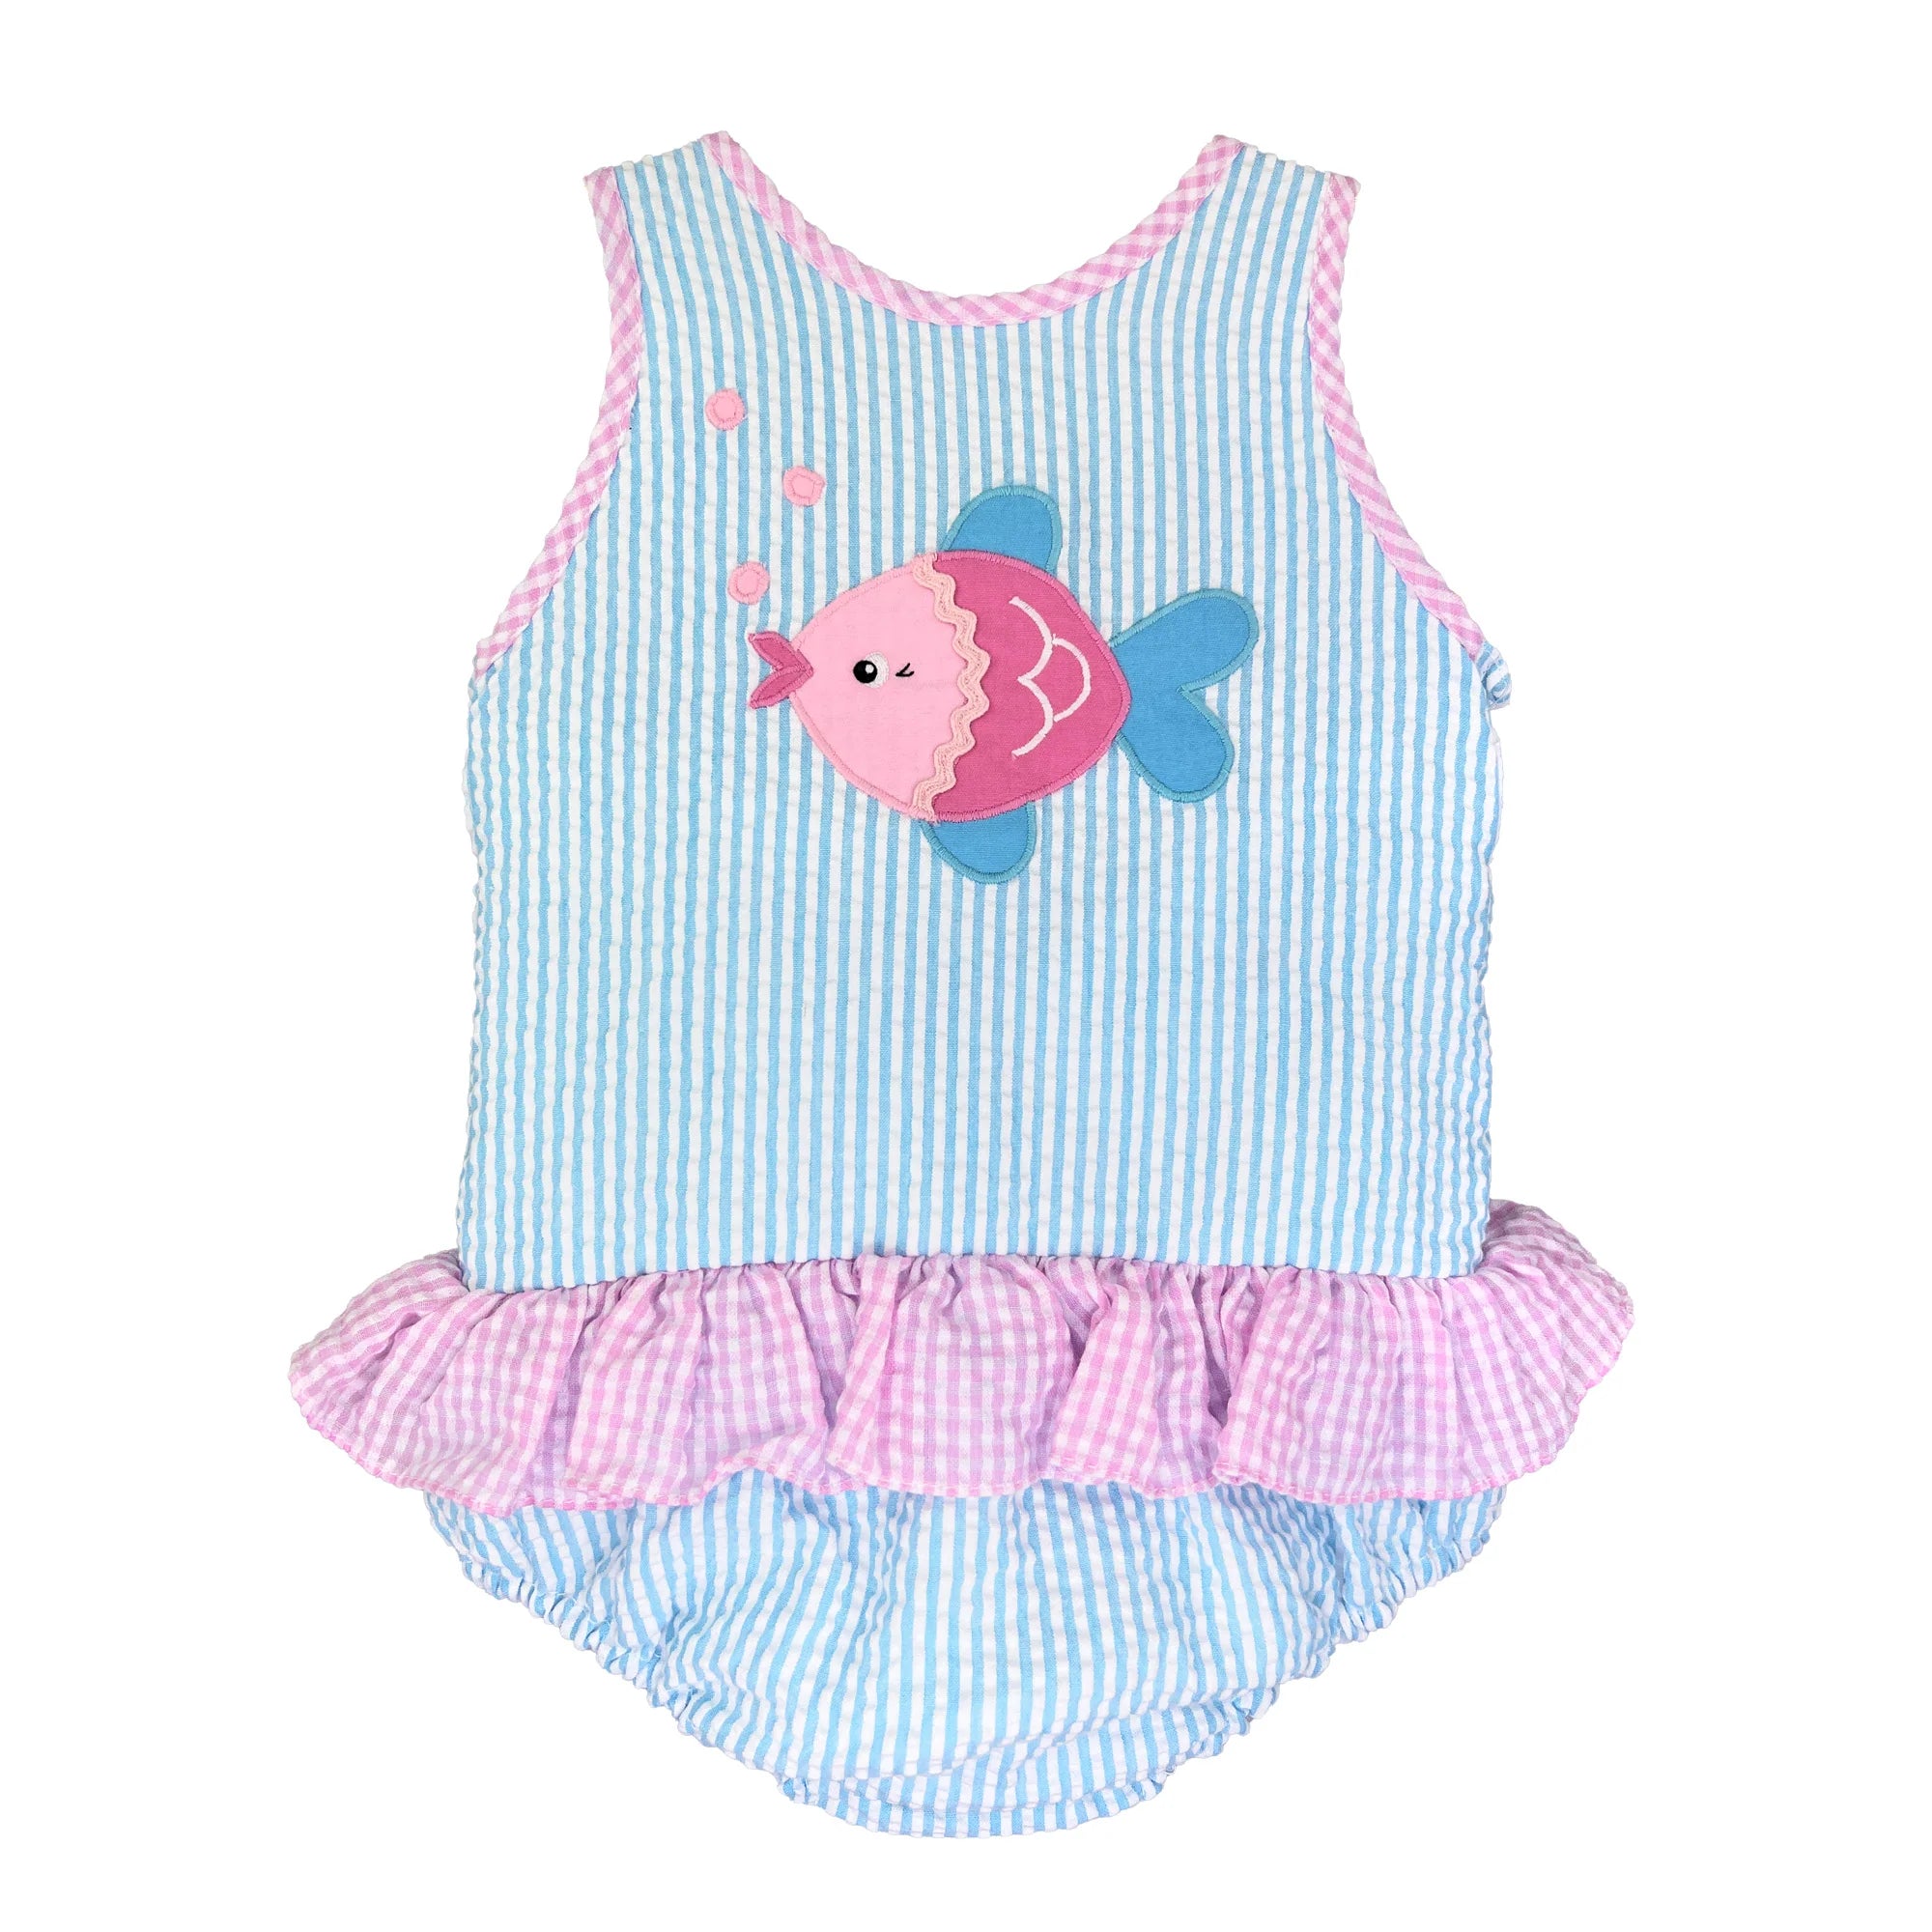 SWIMSUIT WITH FISH APPLIQUE